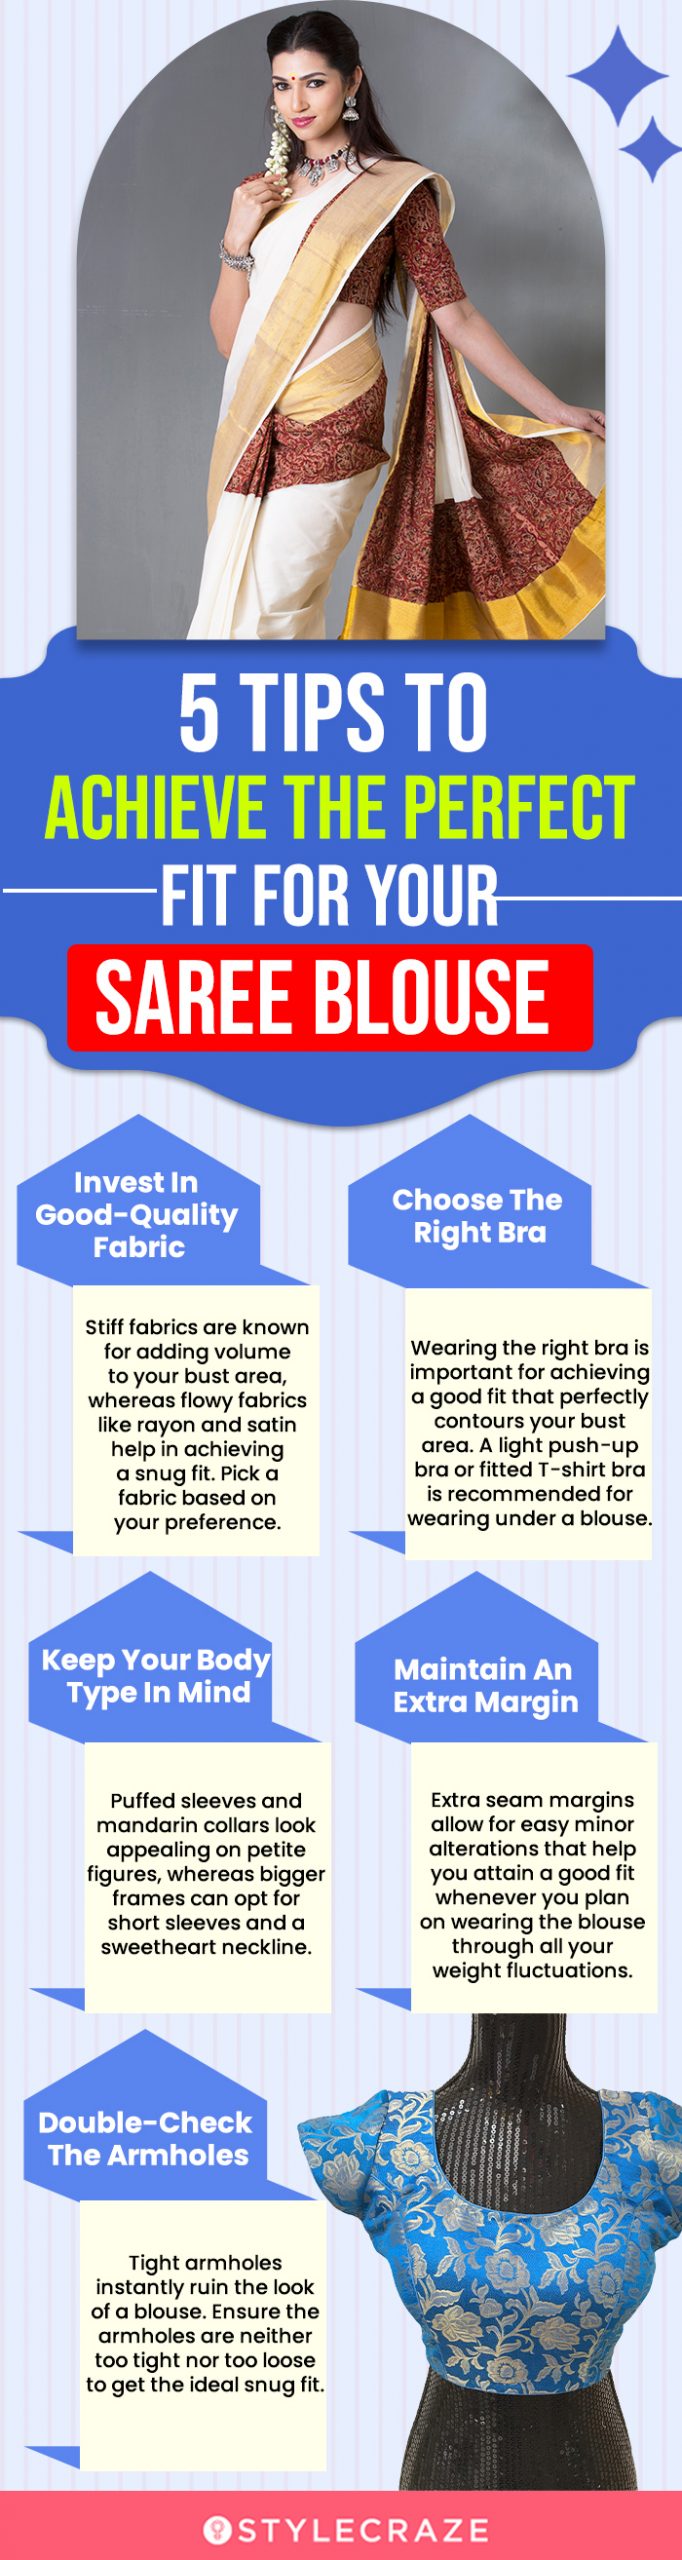 5 Tips To Achieve The Perfect Fit For Your Saree Blouse (infographic)